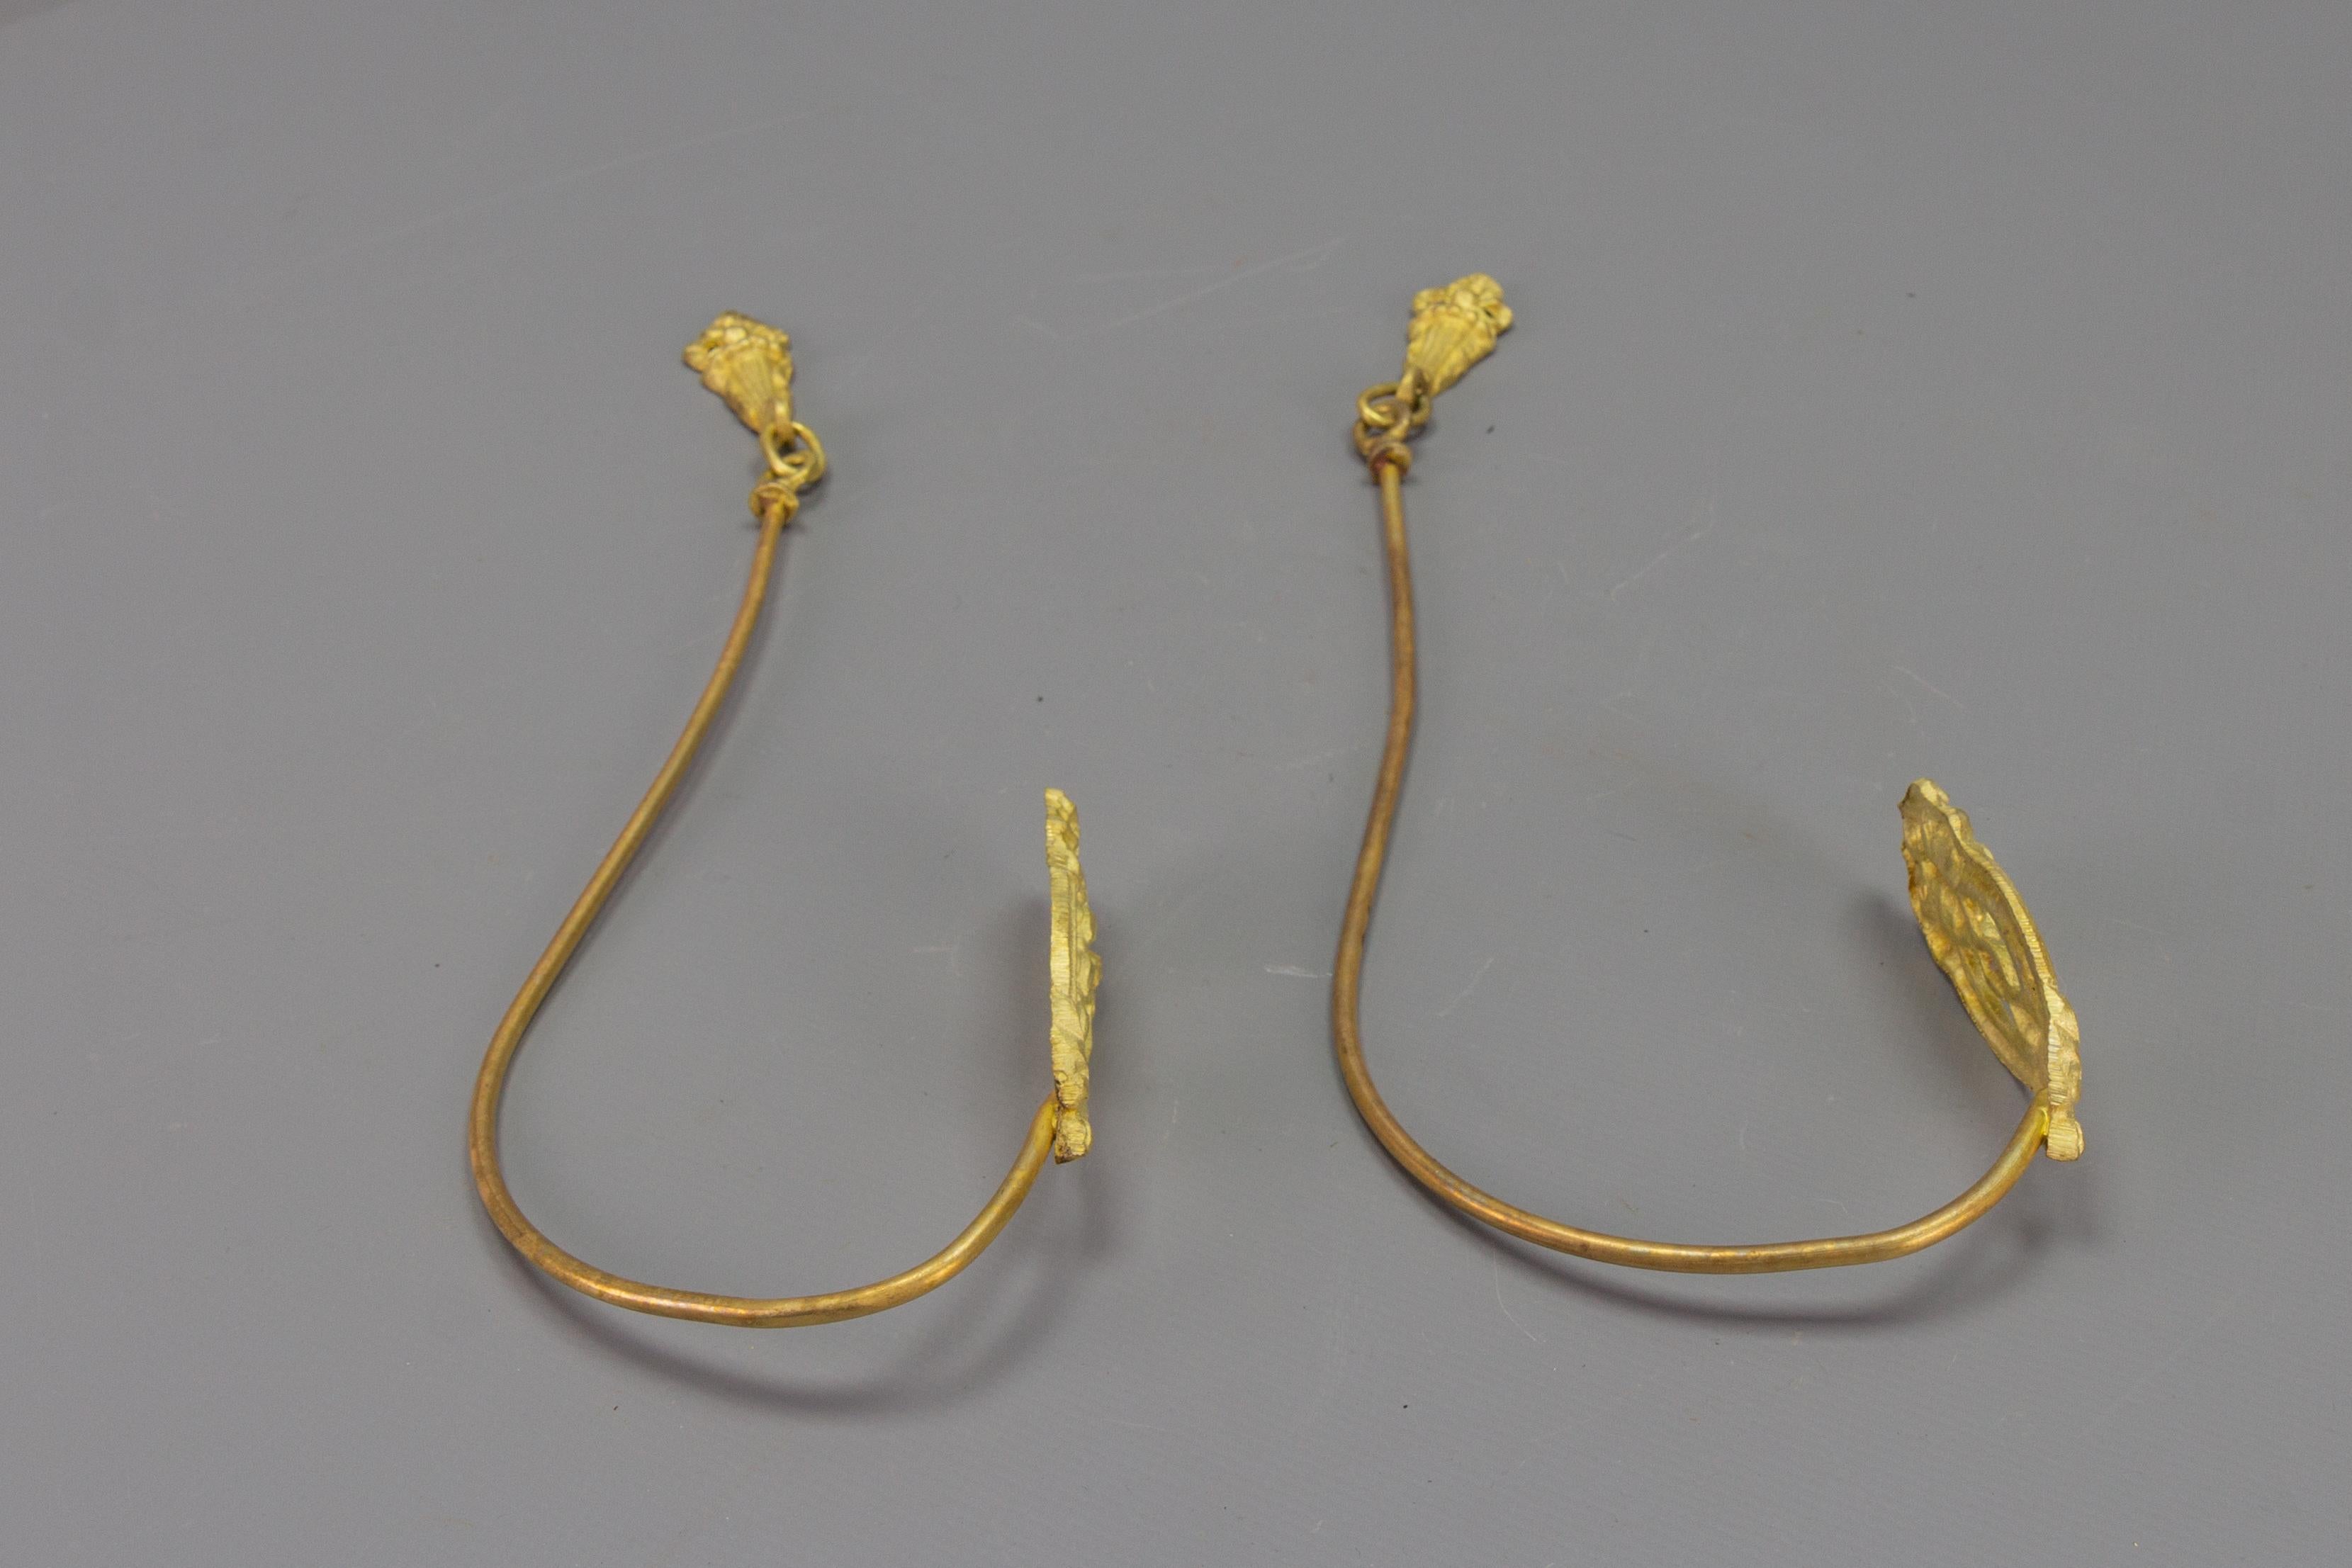 Pair of French Bronze and Brass Curtain Tiebacks or Curtain Holders, ca. 1920 For Sale 7